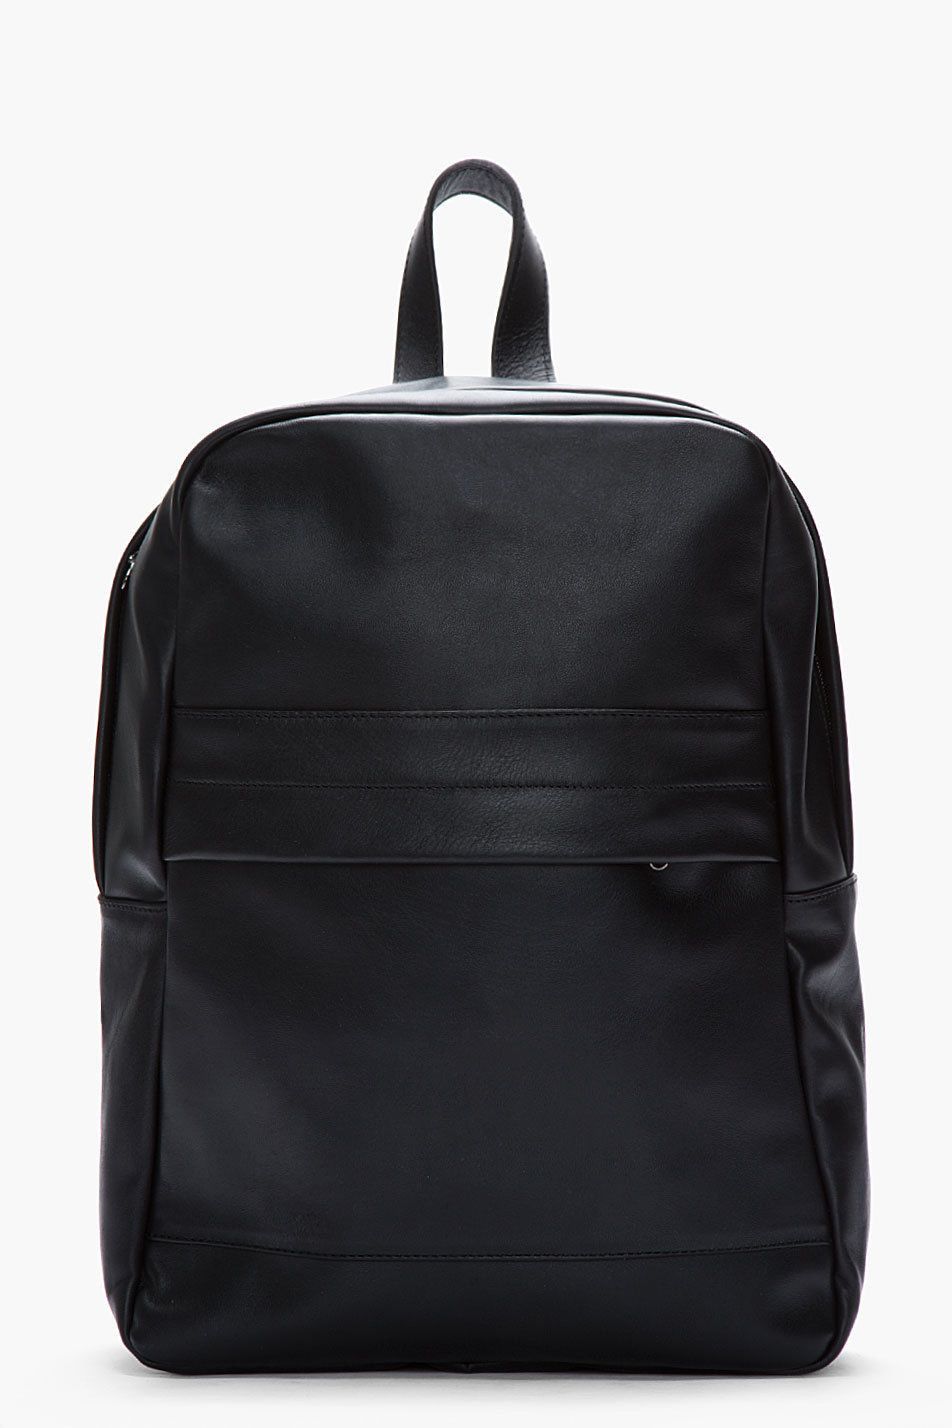 Common Projects Black Leather Backpack Size ONE SIZE - 1 Preview